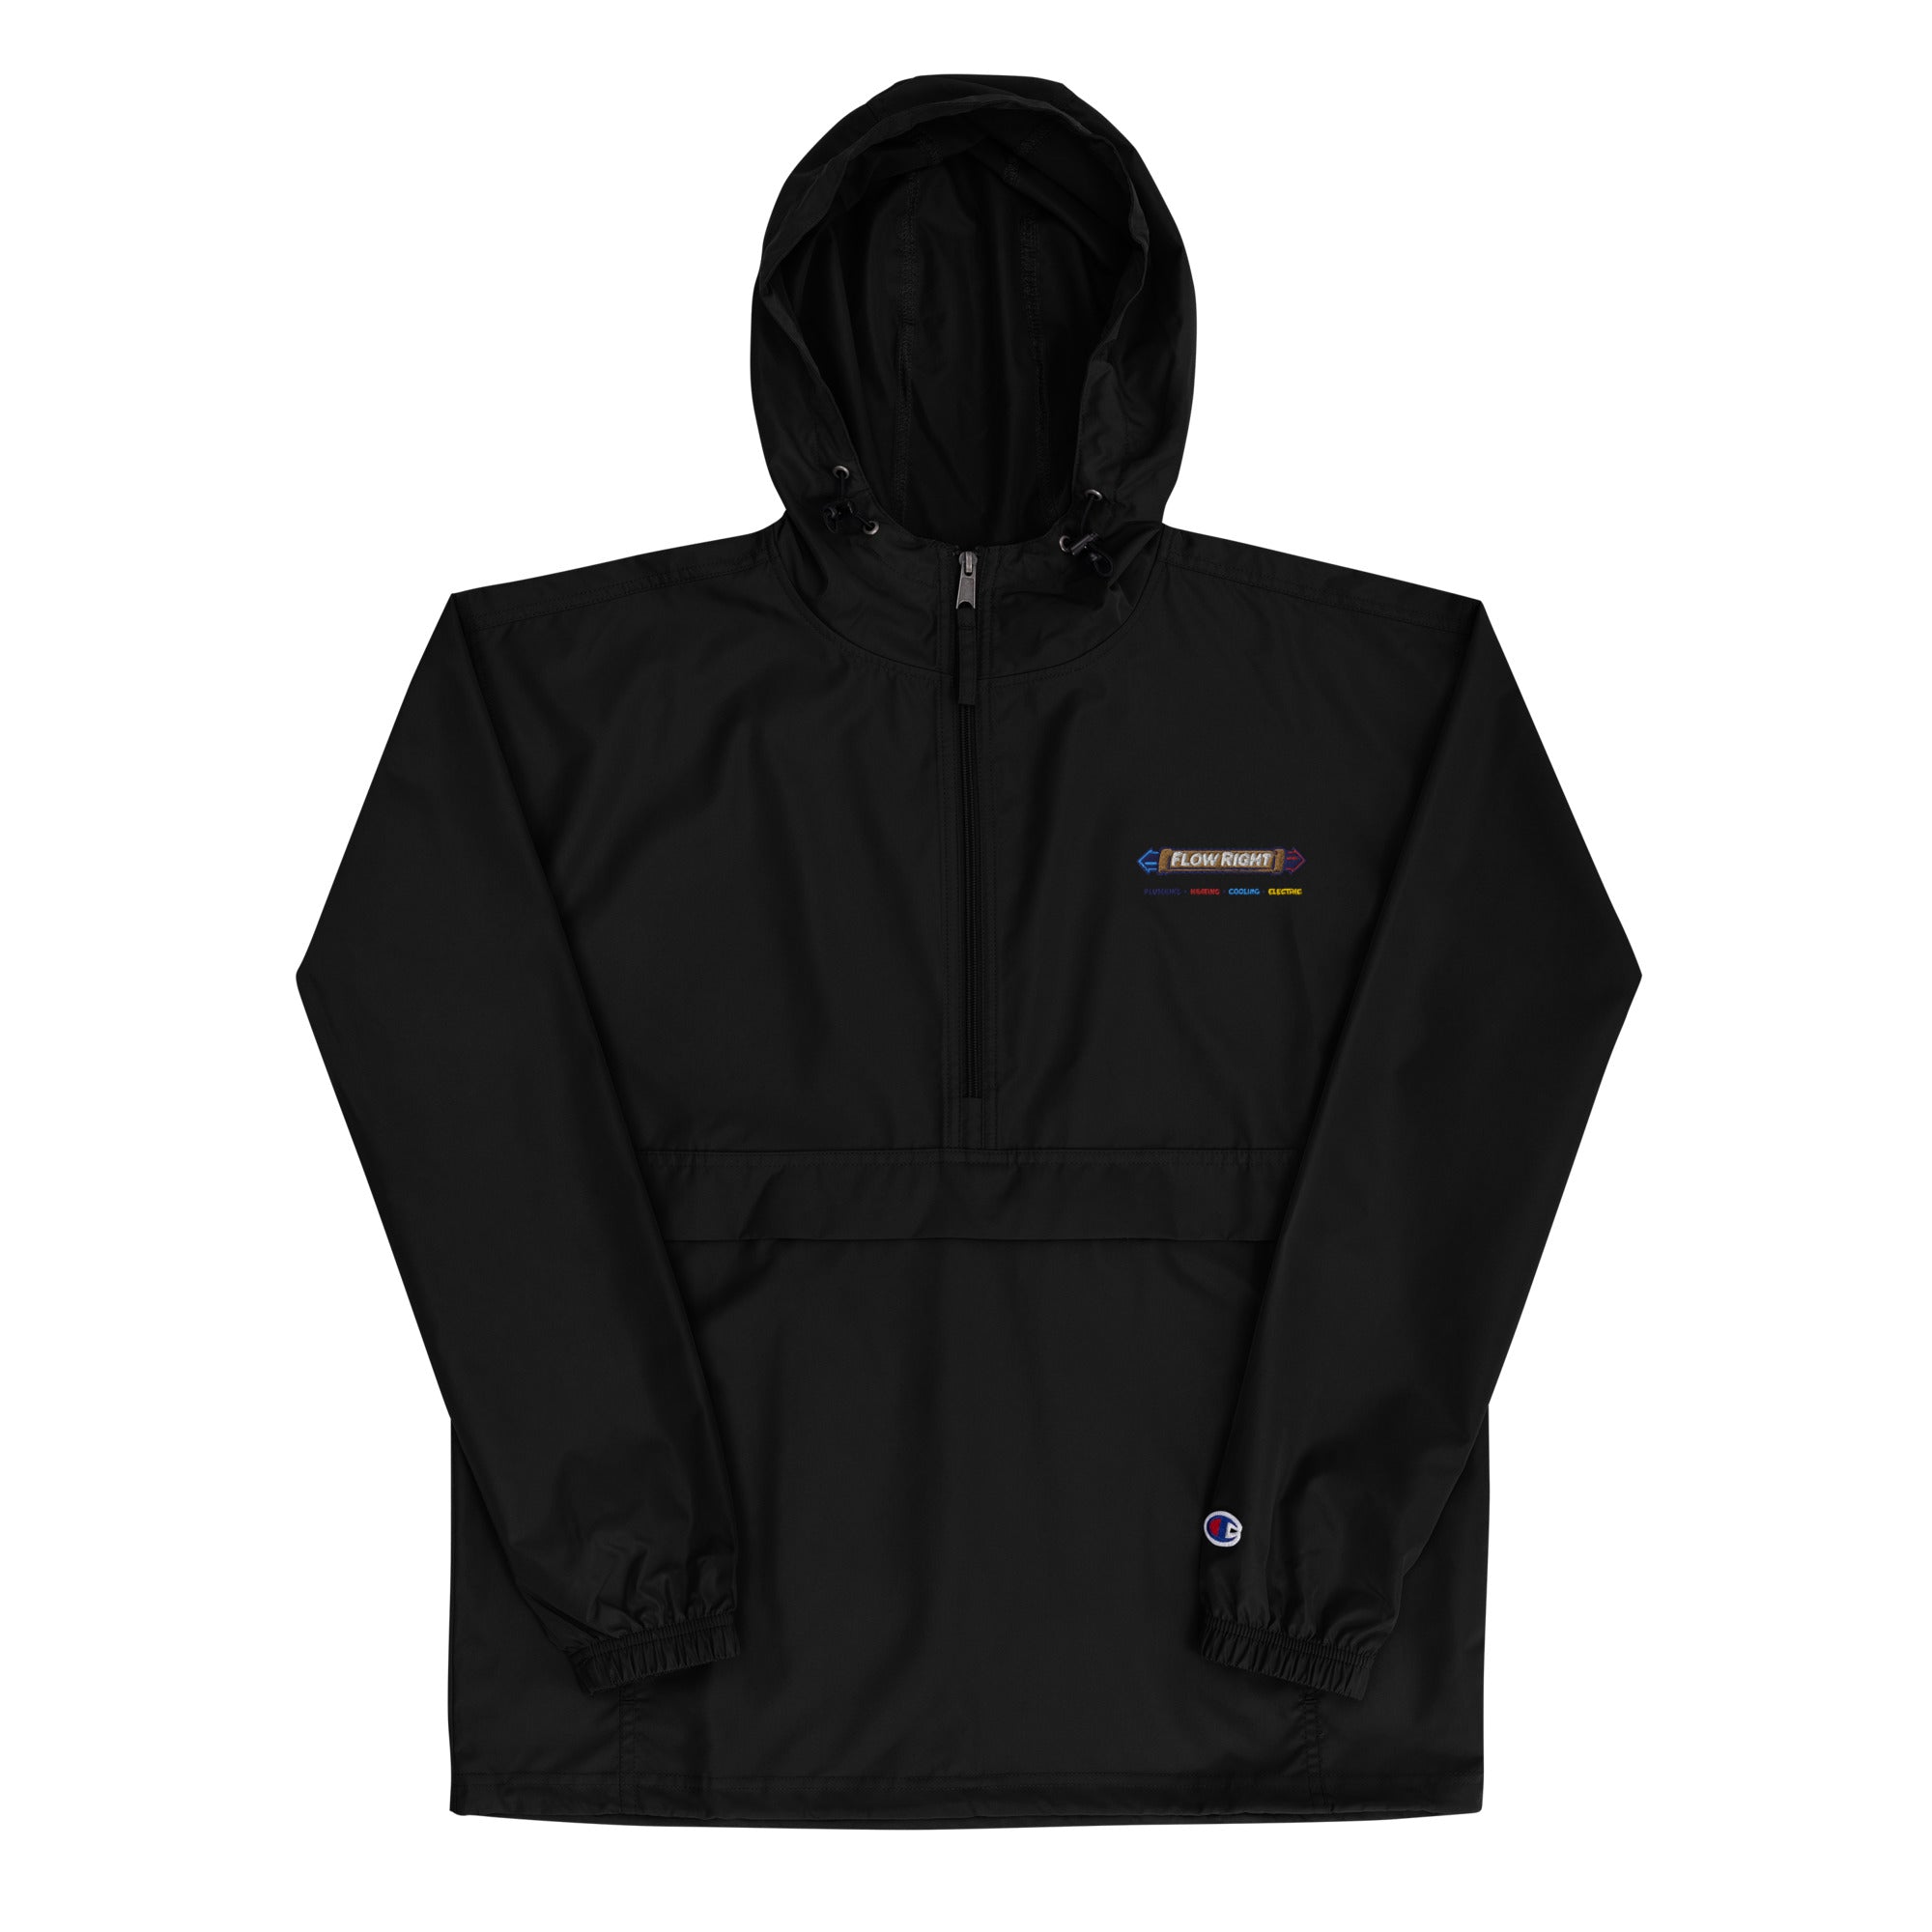 FRPHI Embroidered Champion Packable Jacket